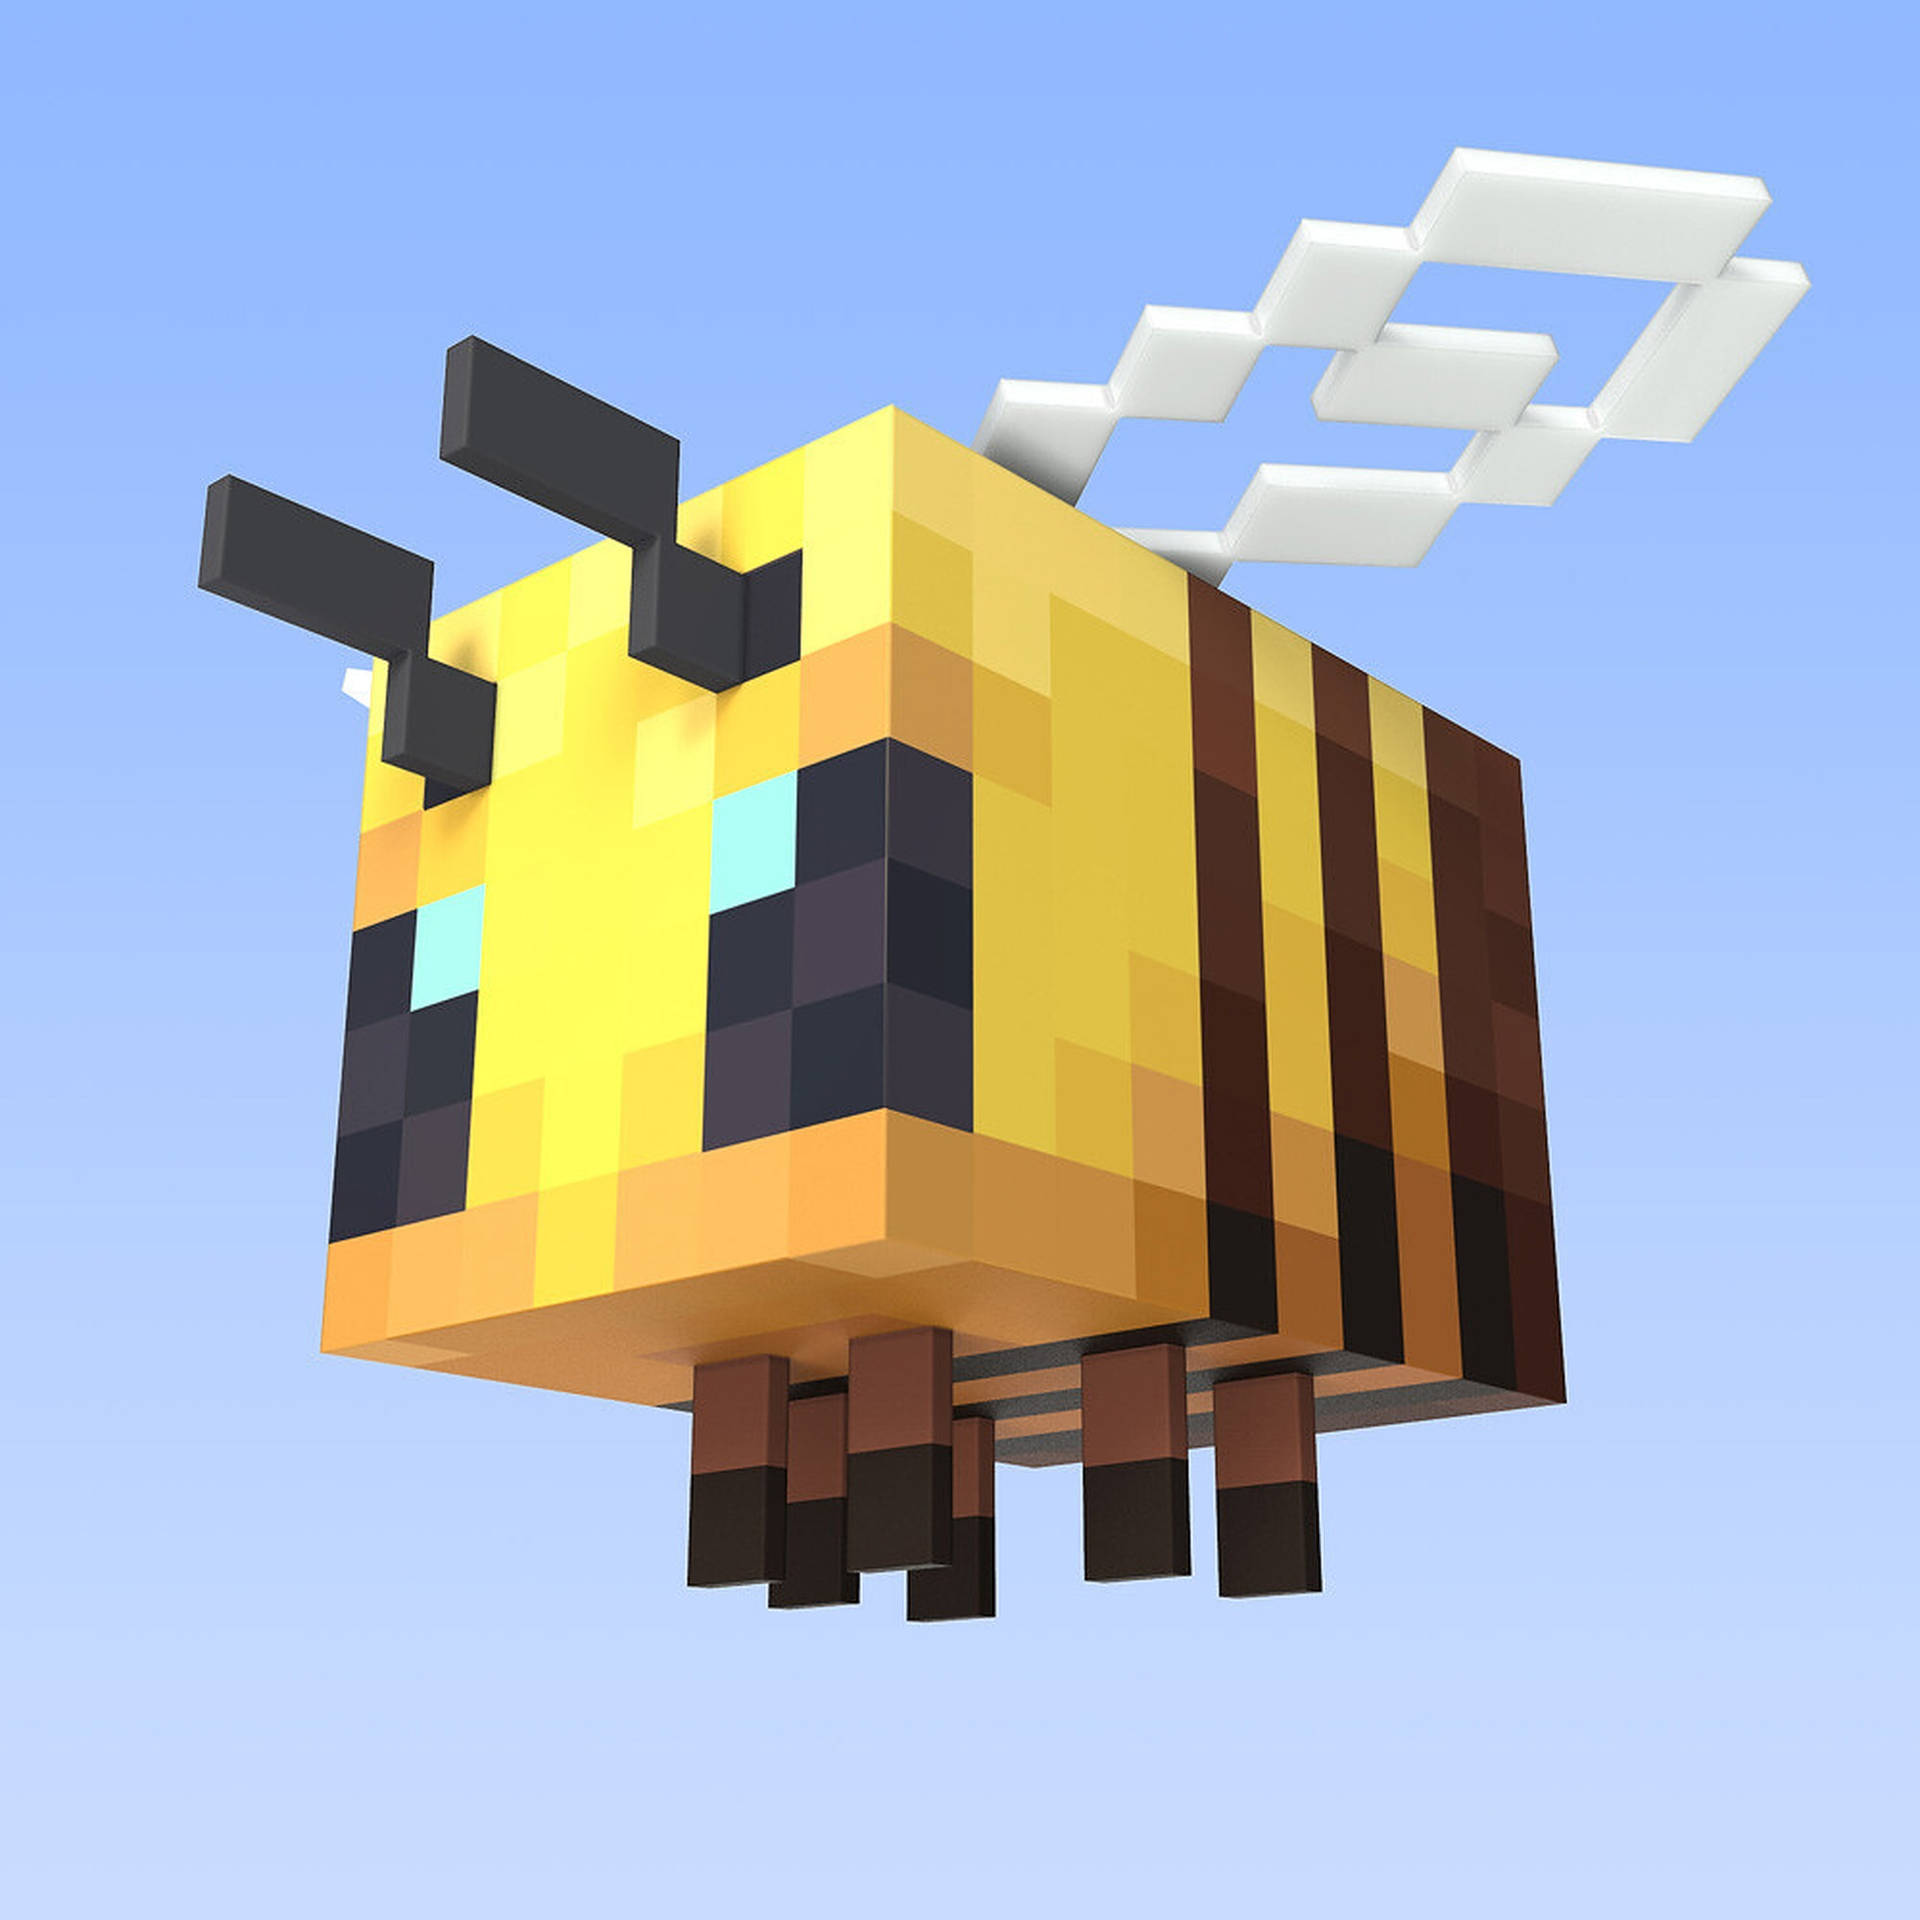 Top 999+ Minecraft Bee Wallpapers Full HD, 4K✅Free to Use